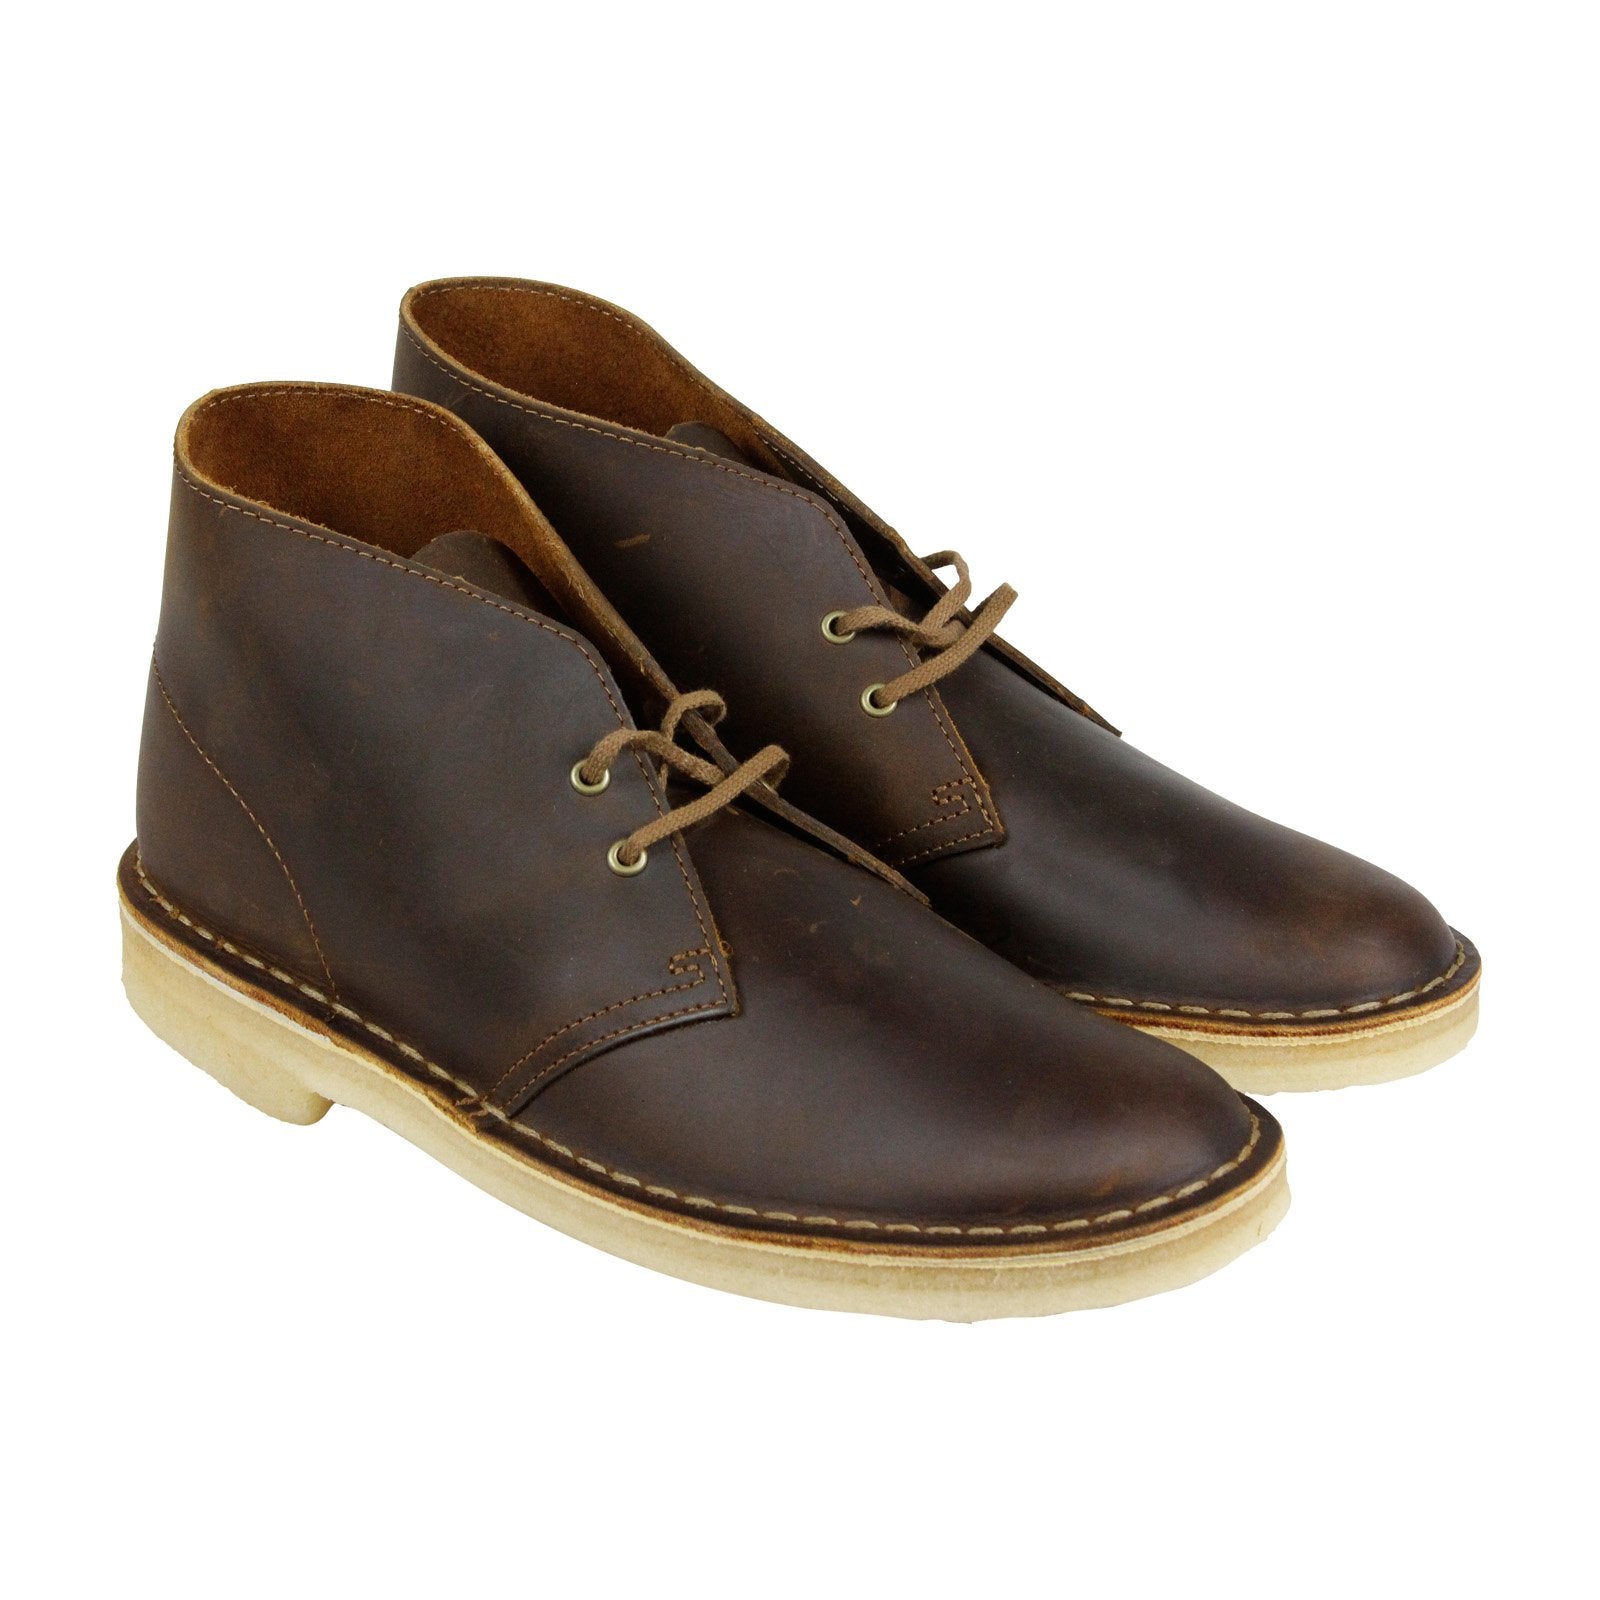 Clarks Desert Boot 26106562 Mens Brown Leather Lace Up Desert Boots ...